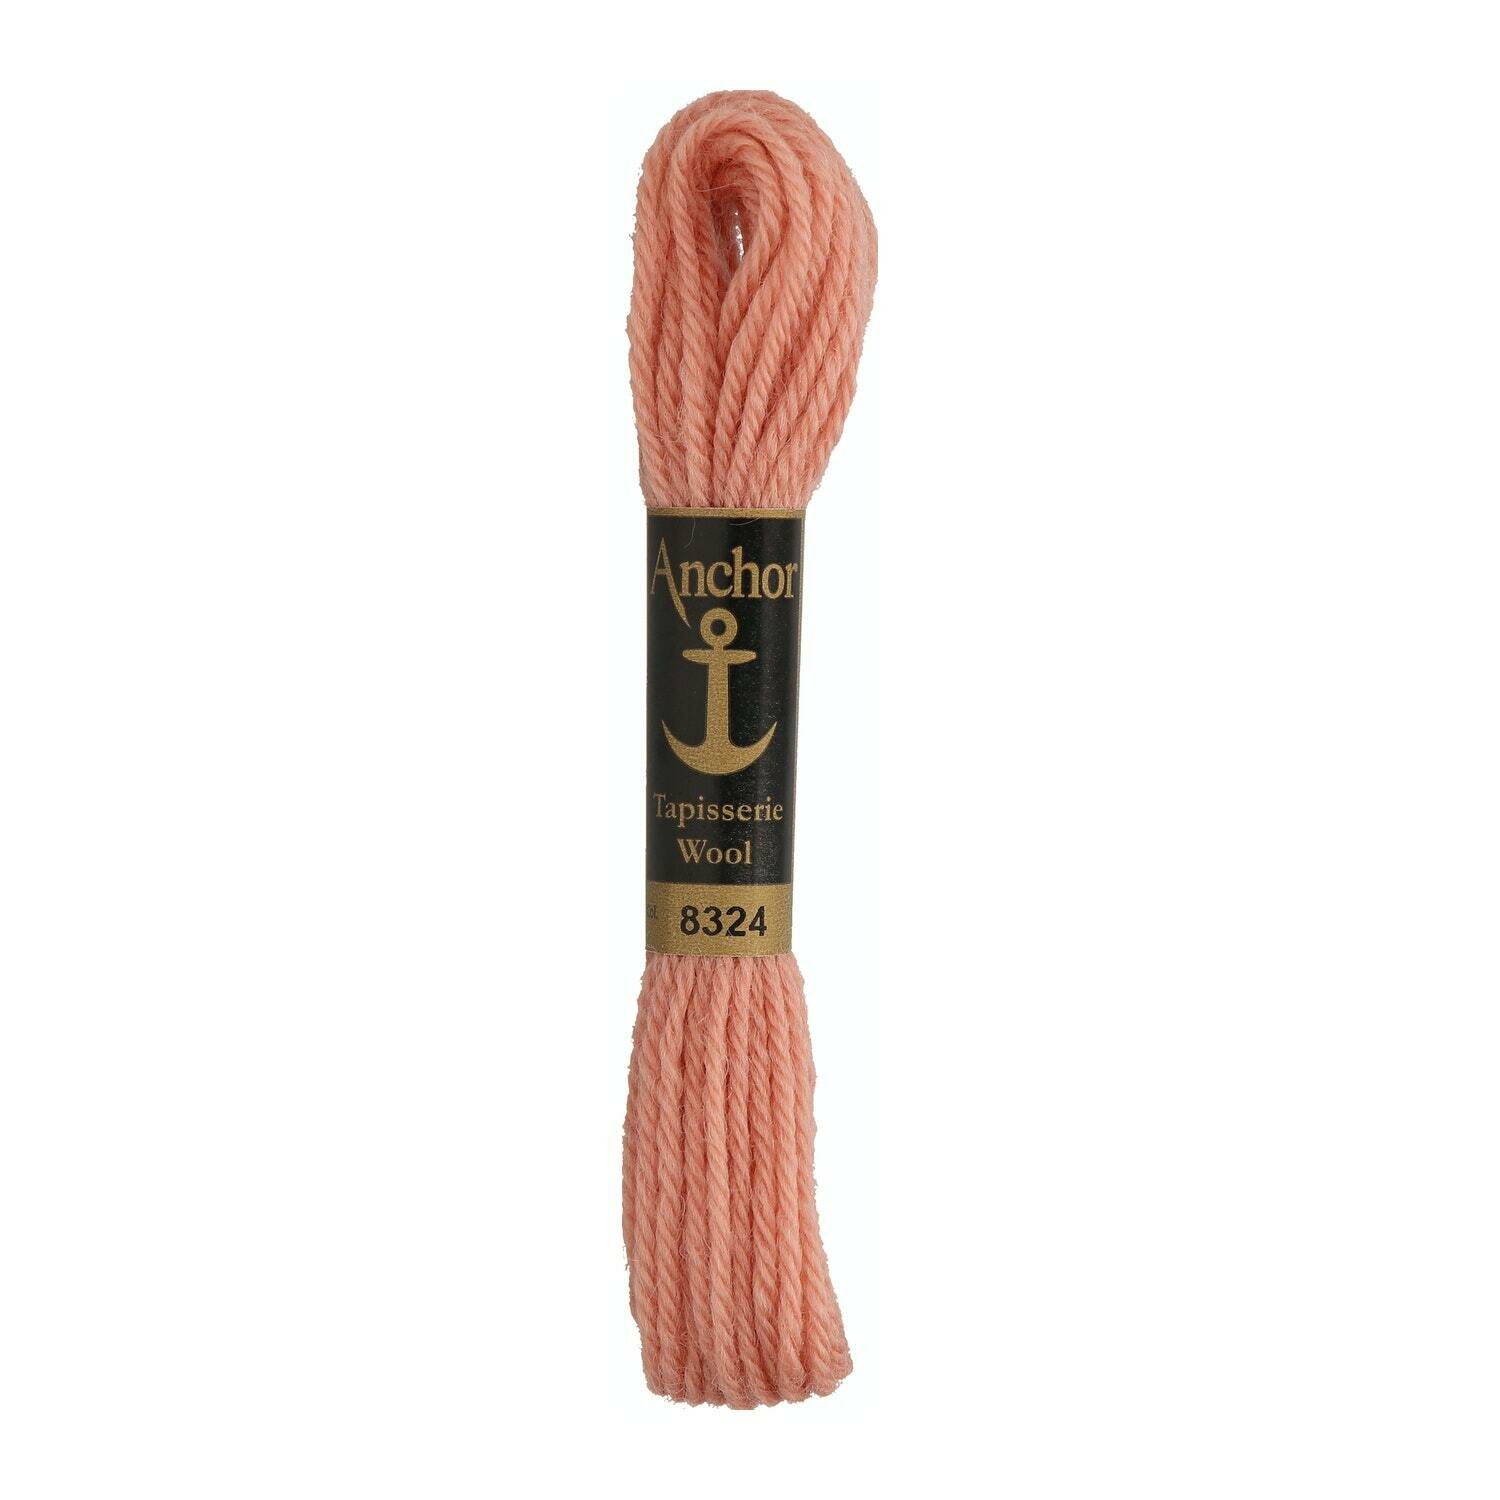 Anchor Tapisserie Wool #  08324